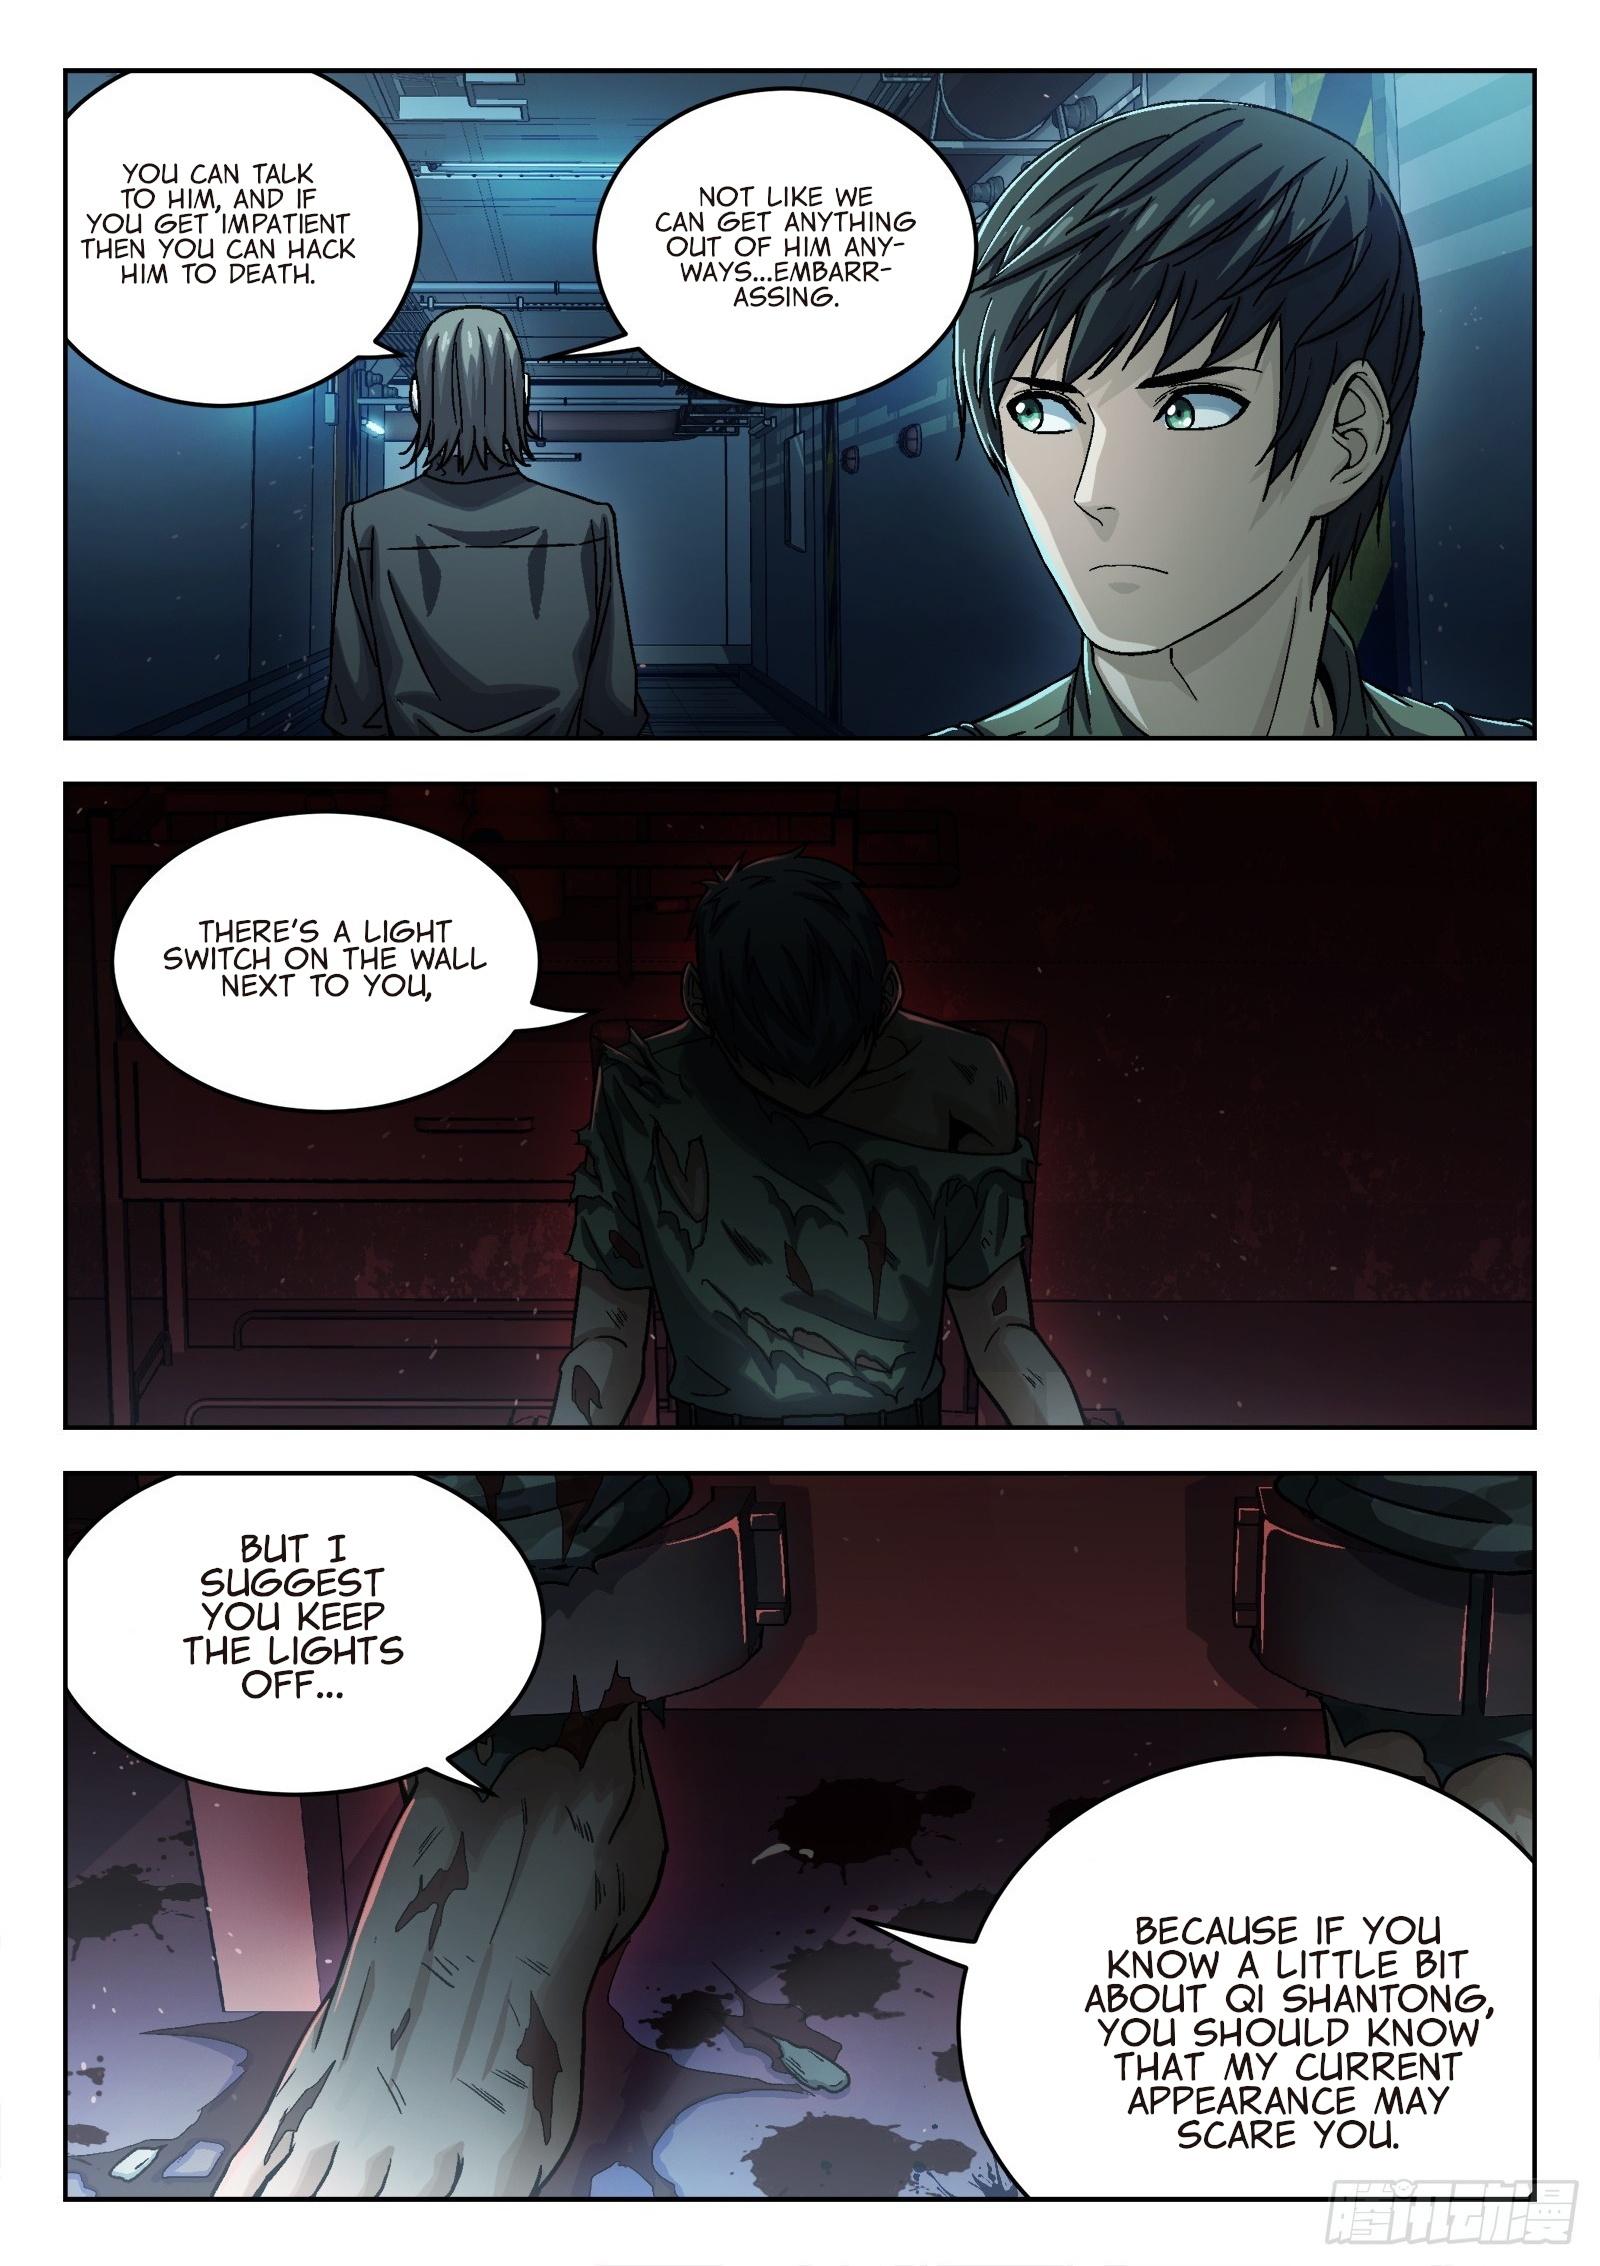 Beyond The Sky - Page 2